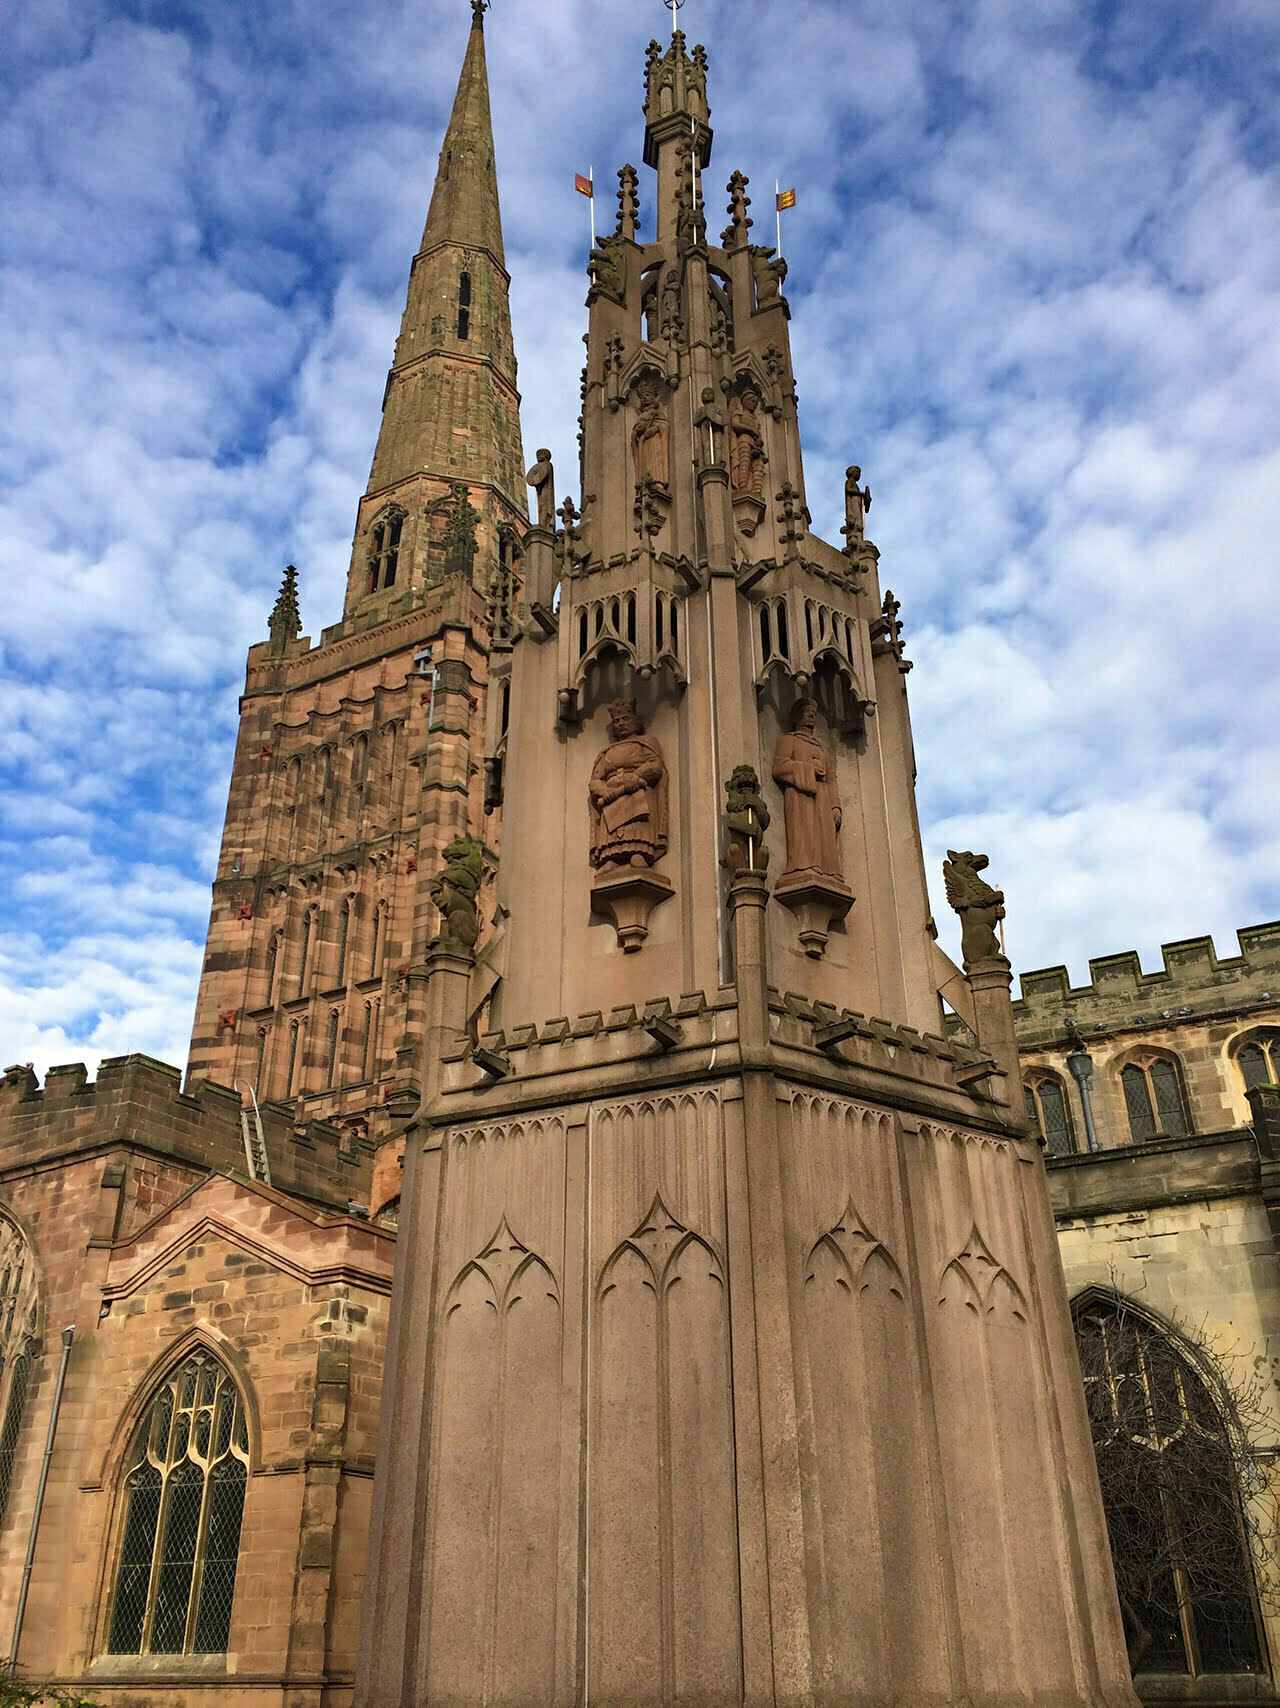 A before picture of the Coventry Cross Monument